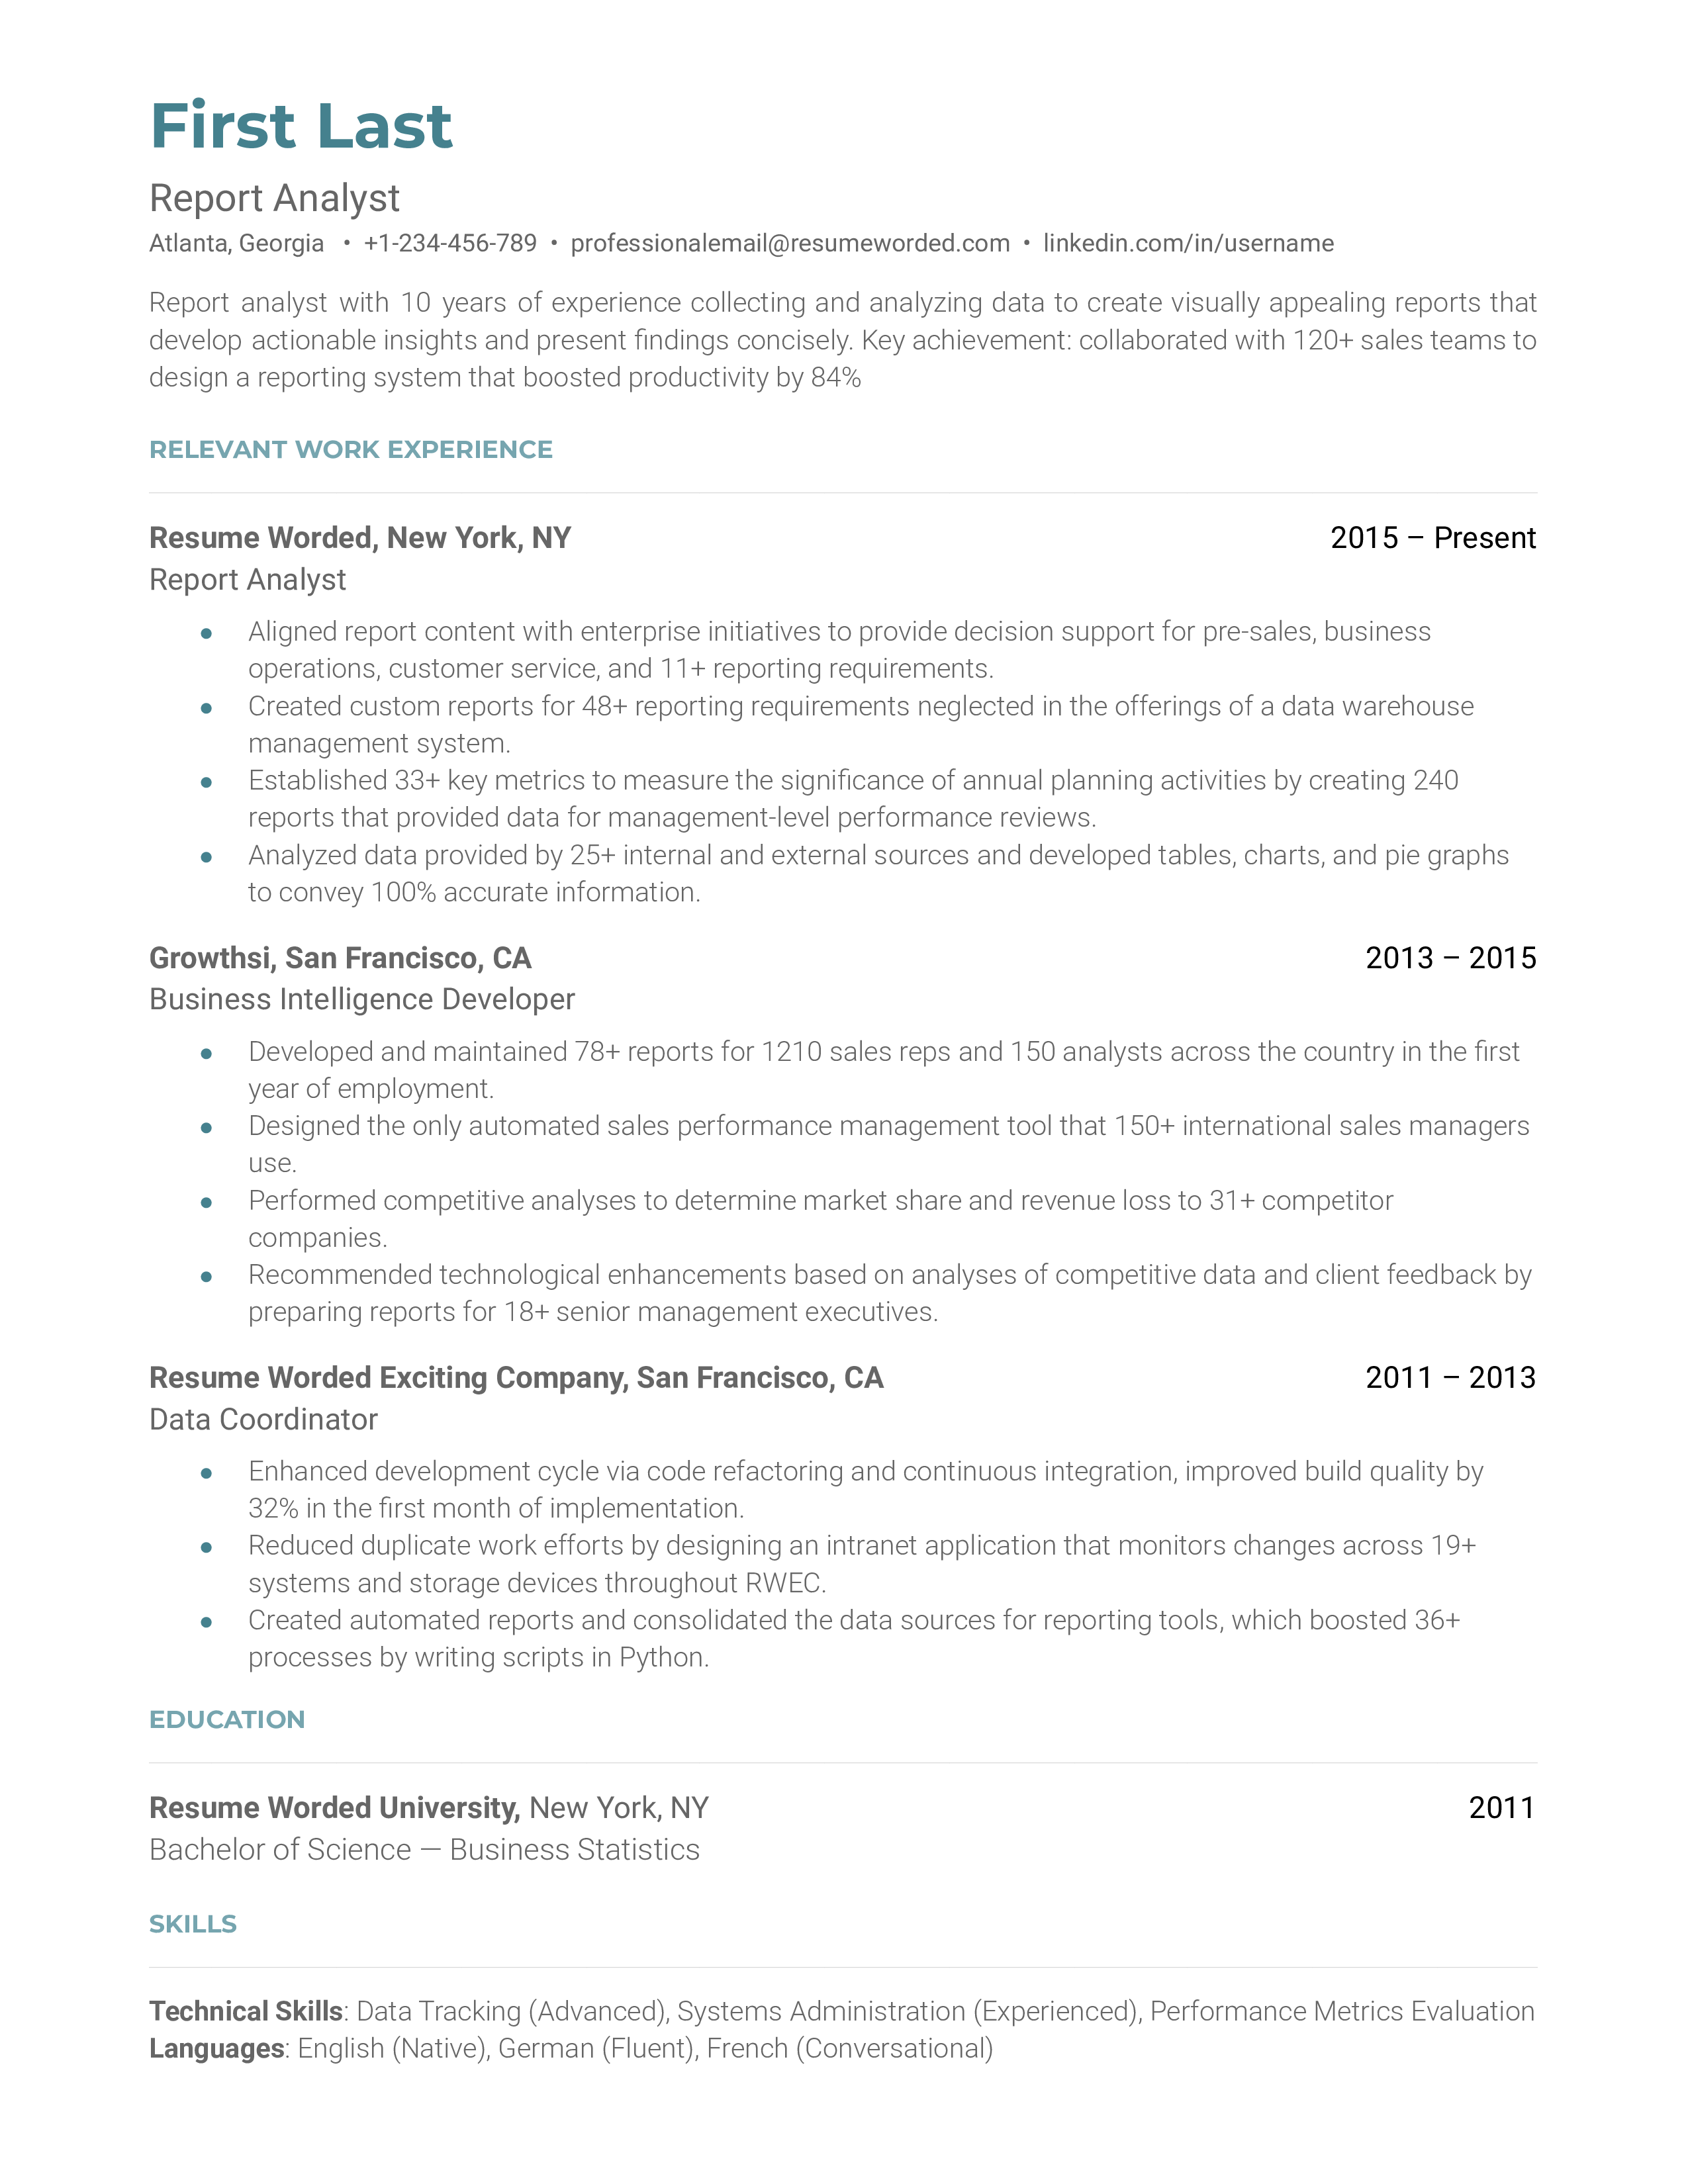 A report analyst resume template with strong action verbs.